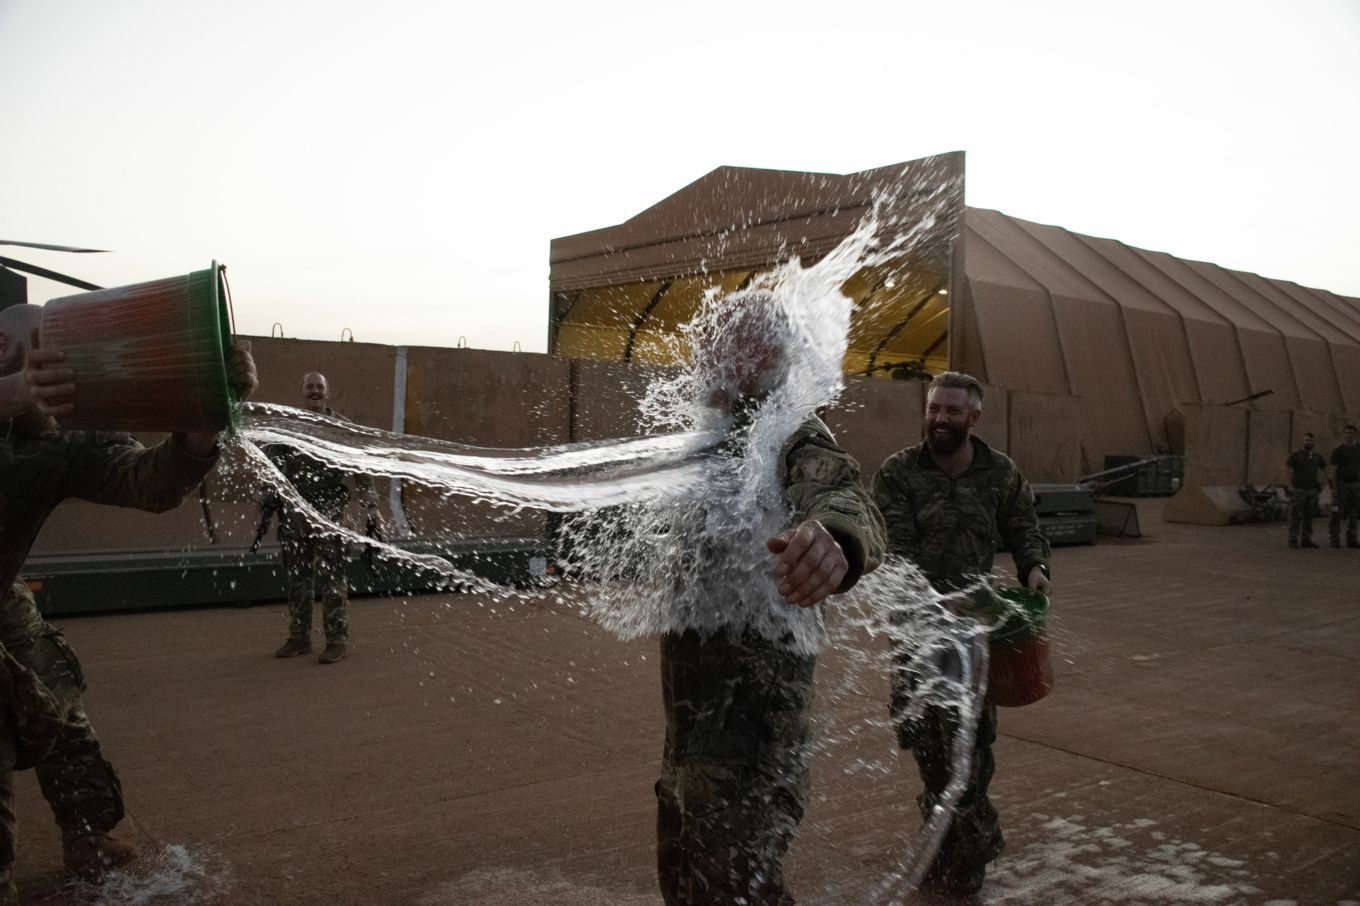 Master Aircrew Ruffles being soaked by three other personnel with buckets of water.